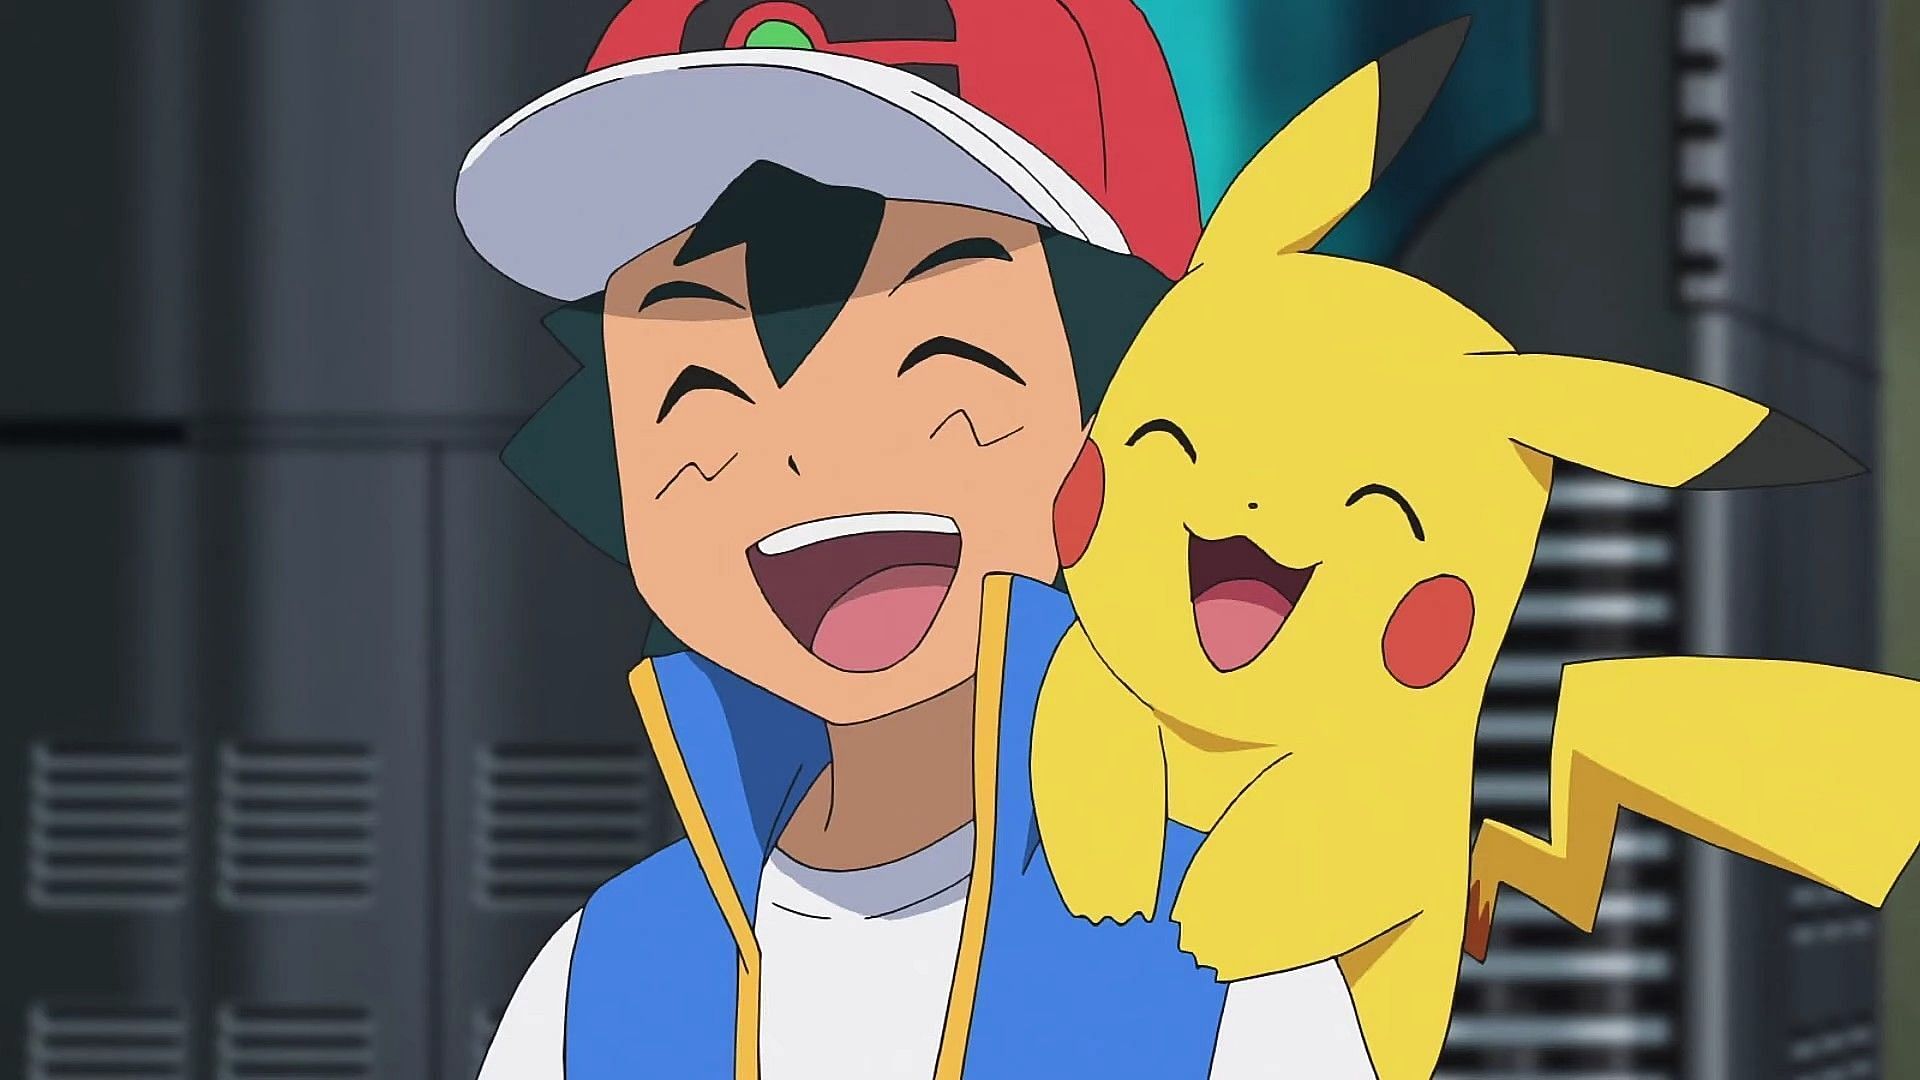 Pokémon's Current Anime Series Is The Most Like The Games Yet